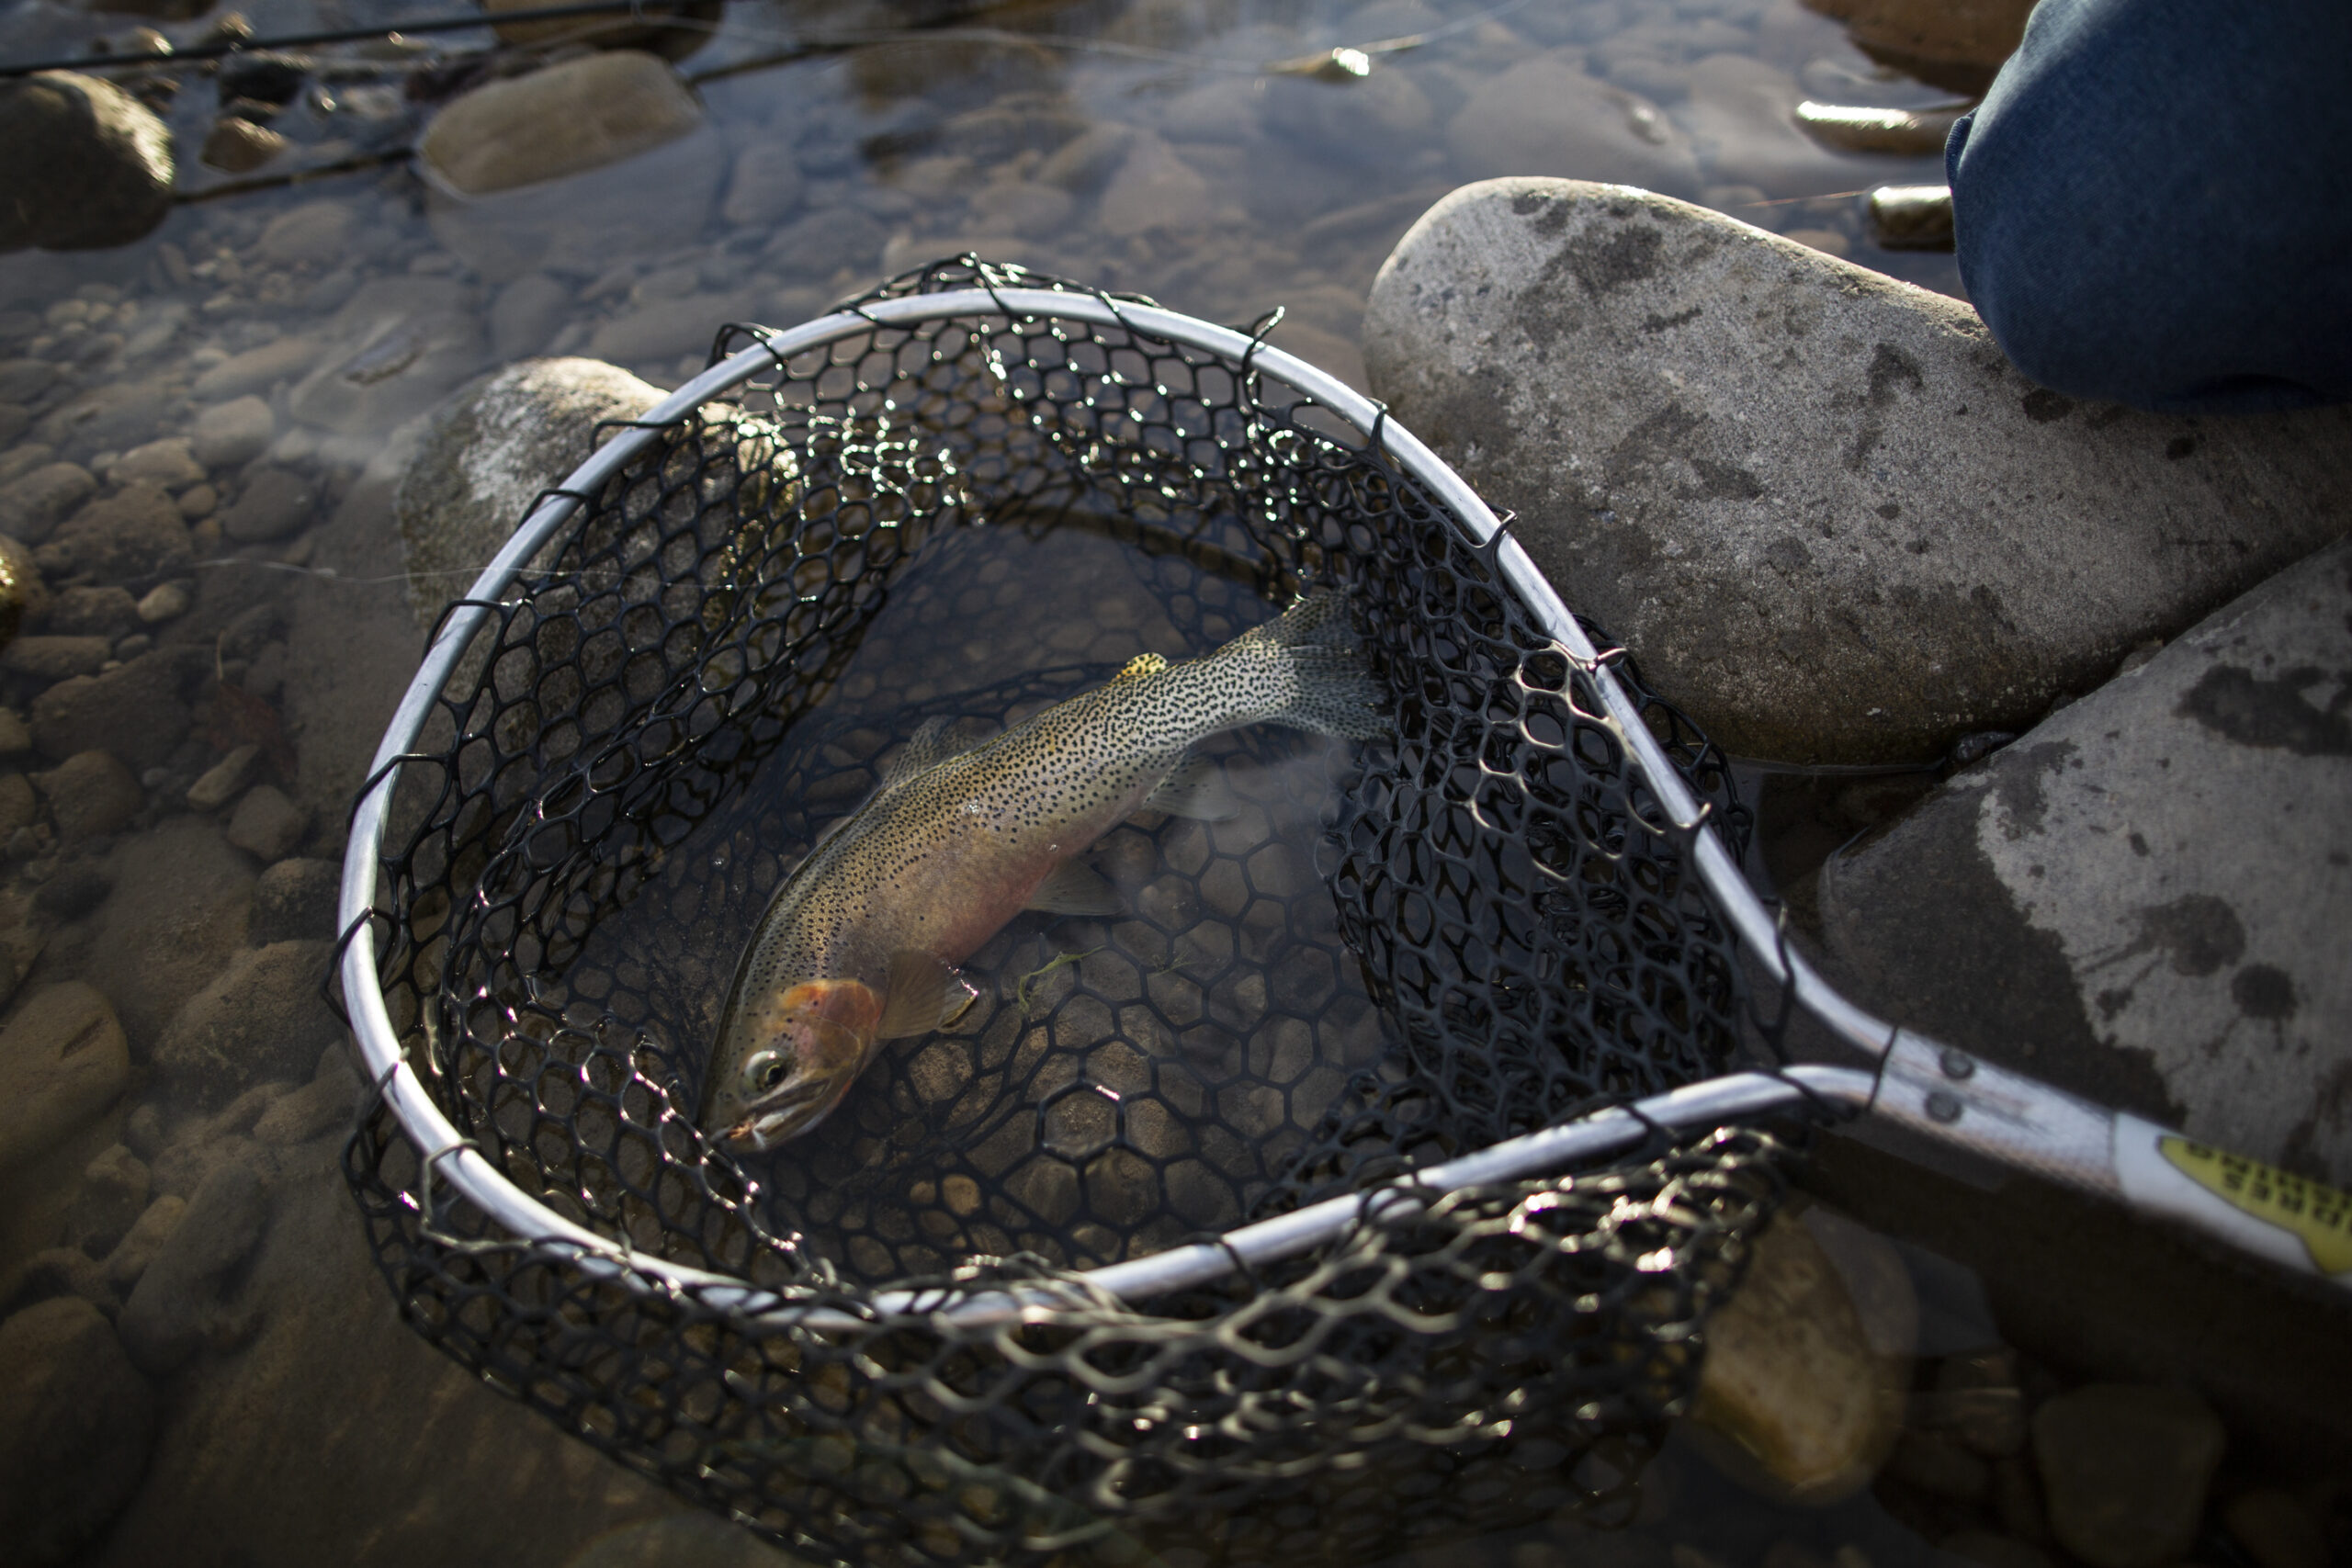 A westslope cutthroat trout in the Elk River